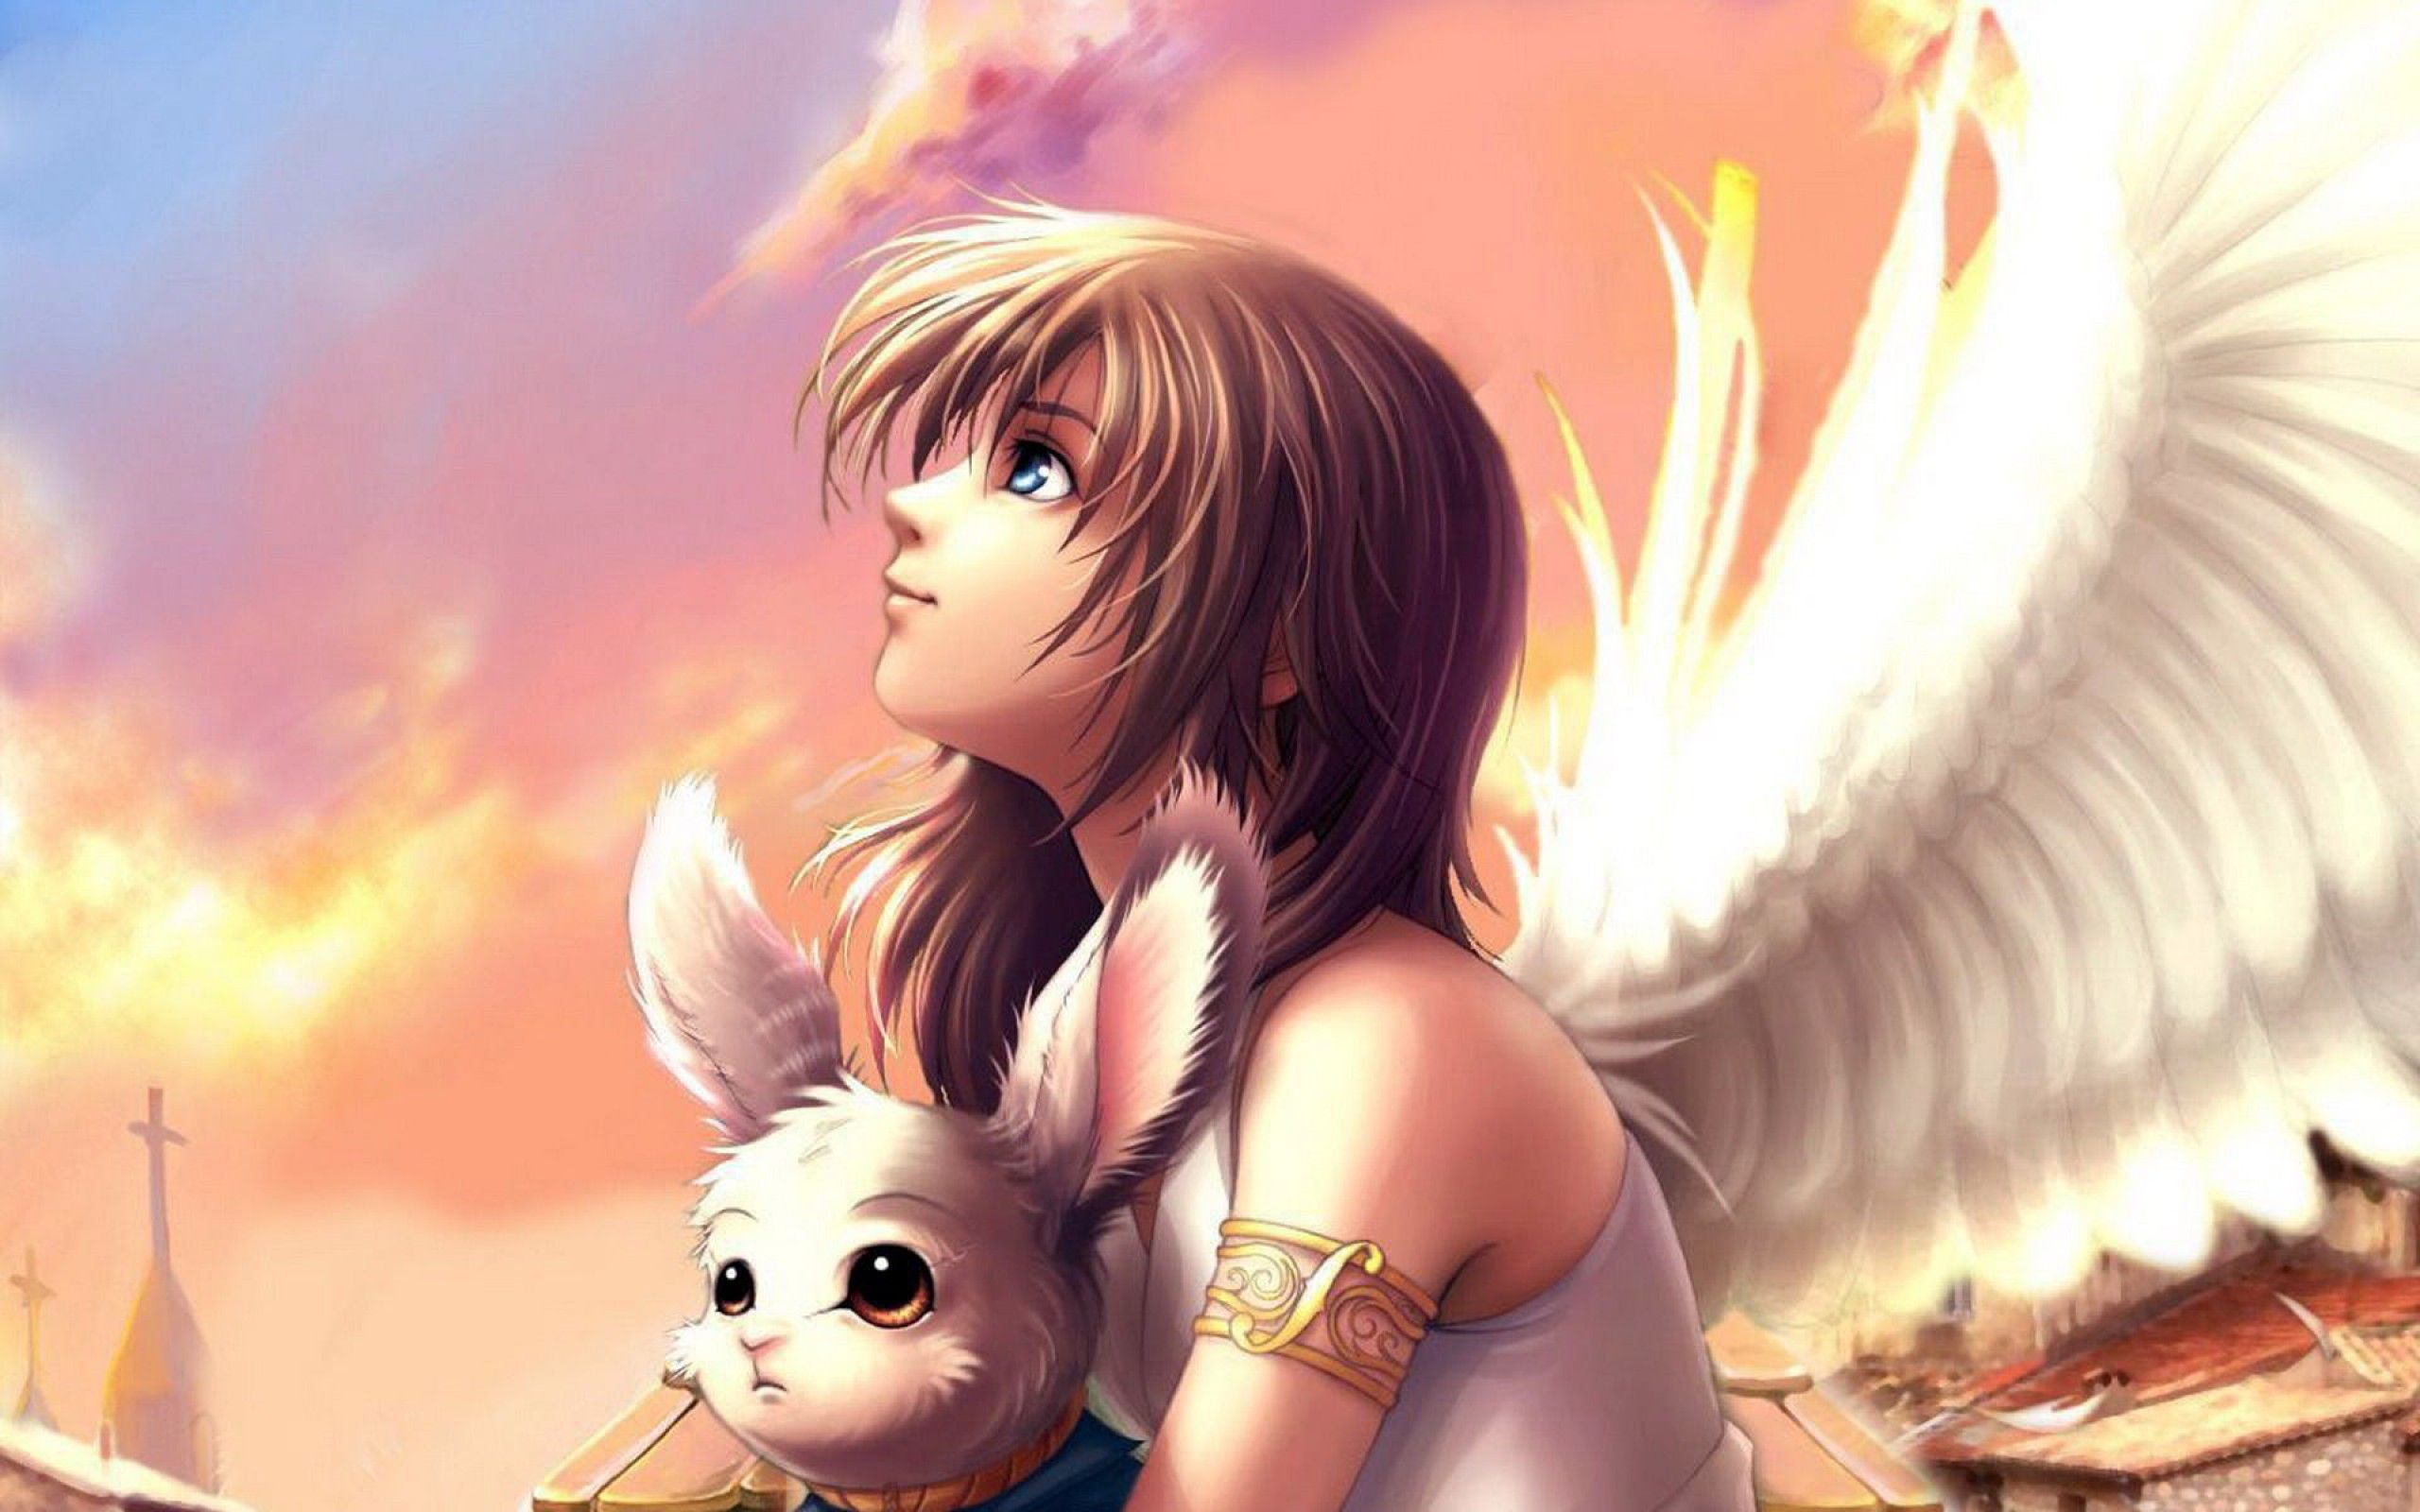 Cute Angel Anime 2371295 Hd Wallpaper Backgrounds Download